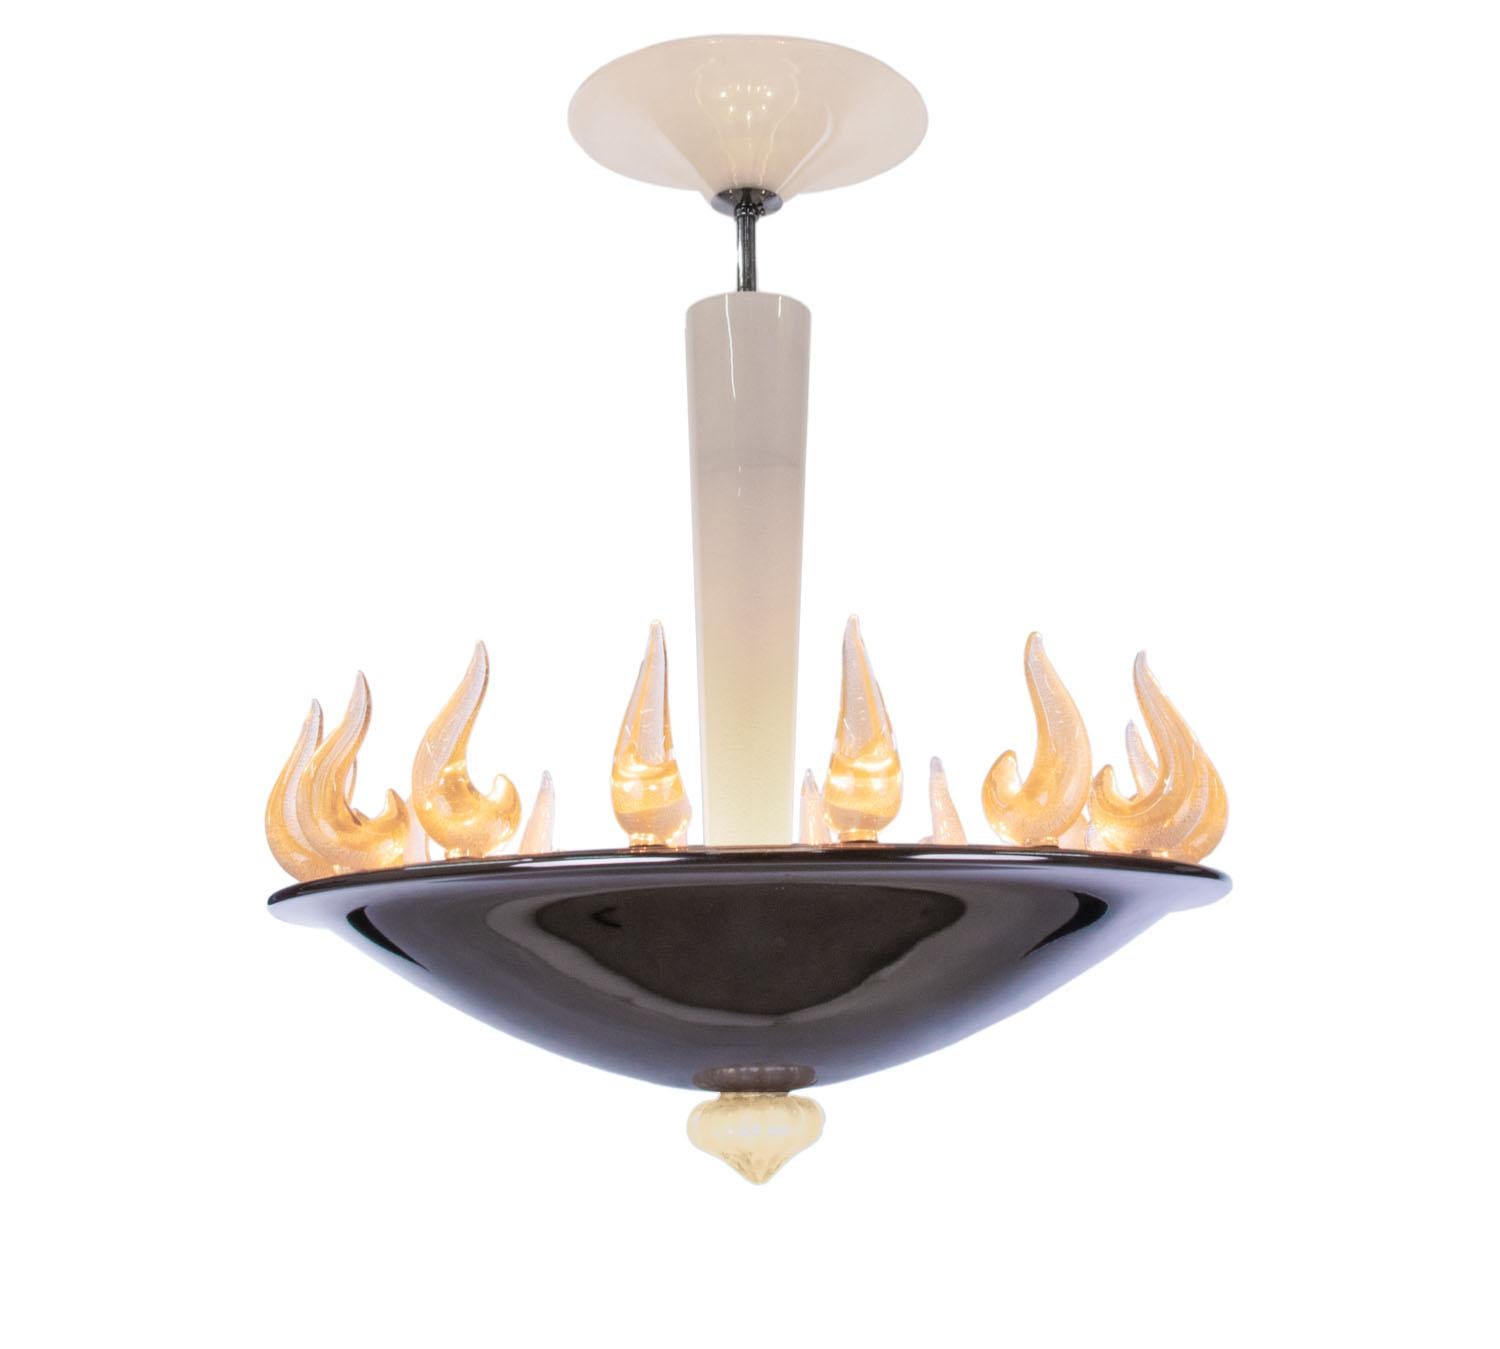 Mid-20th Century Vintage Murano Glass Flame Chandelier in the manner of Barovier & Toso 1950s For Sale